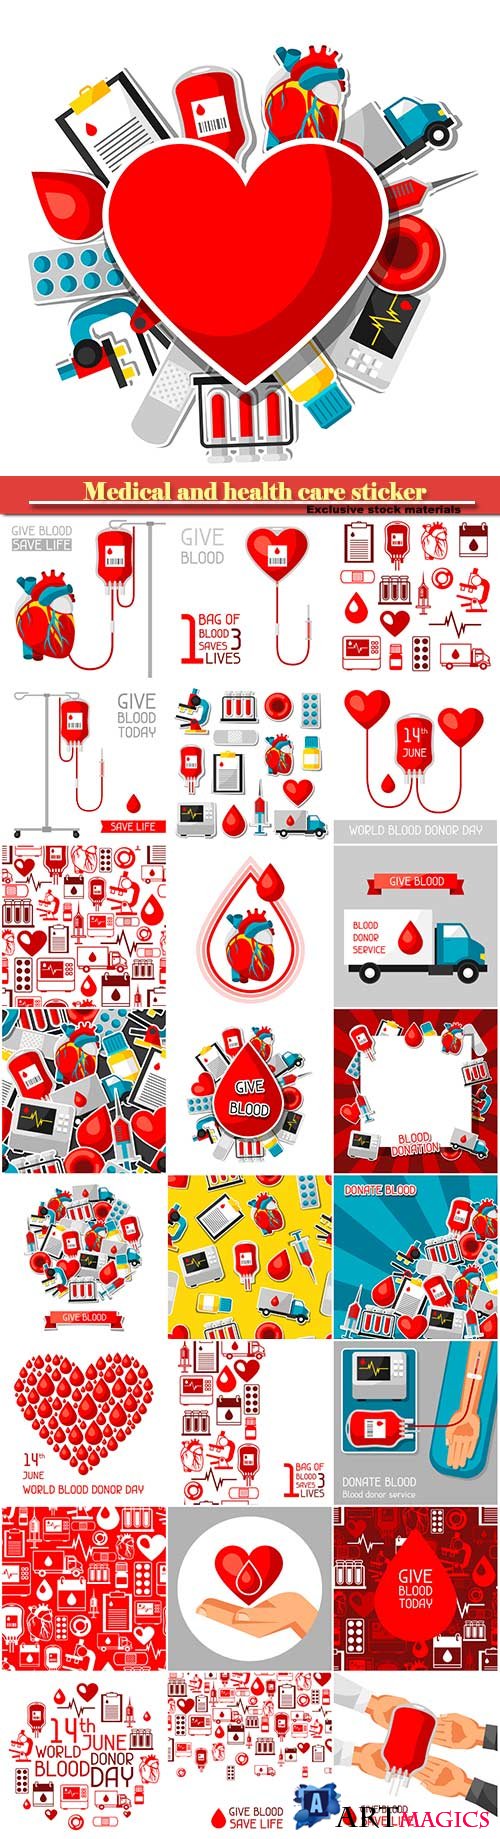 Medical and health care sticker objects, blood donation items